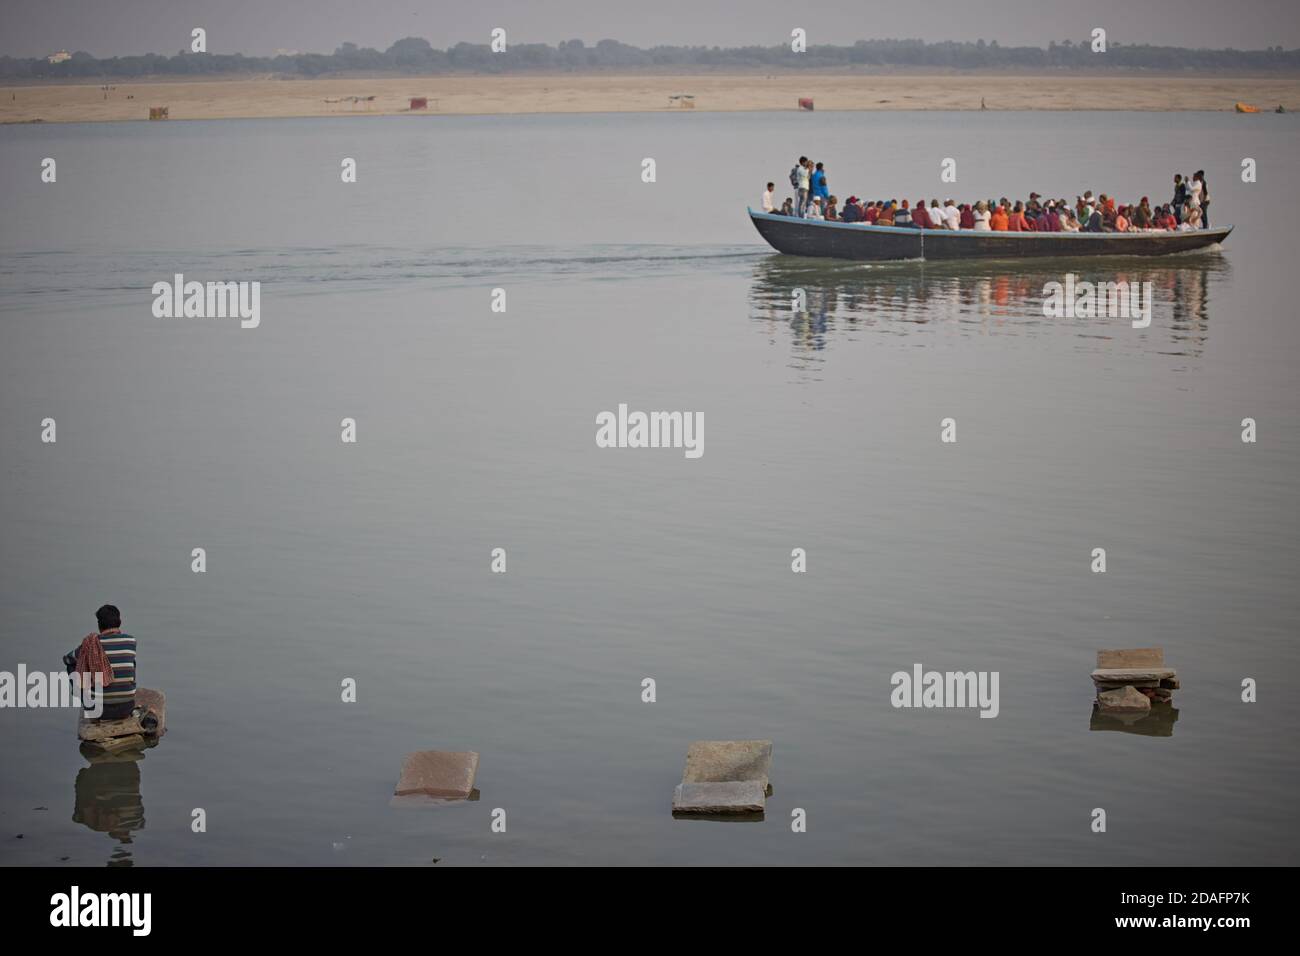 Varanasi, India, December 2015. A boat full of pilgrims passes in front of a man sitting on a stone to wash clothes in the Ganges River. Stock Photo